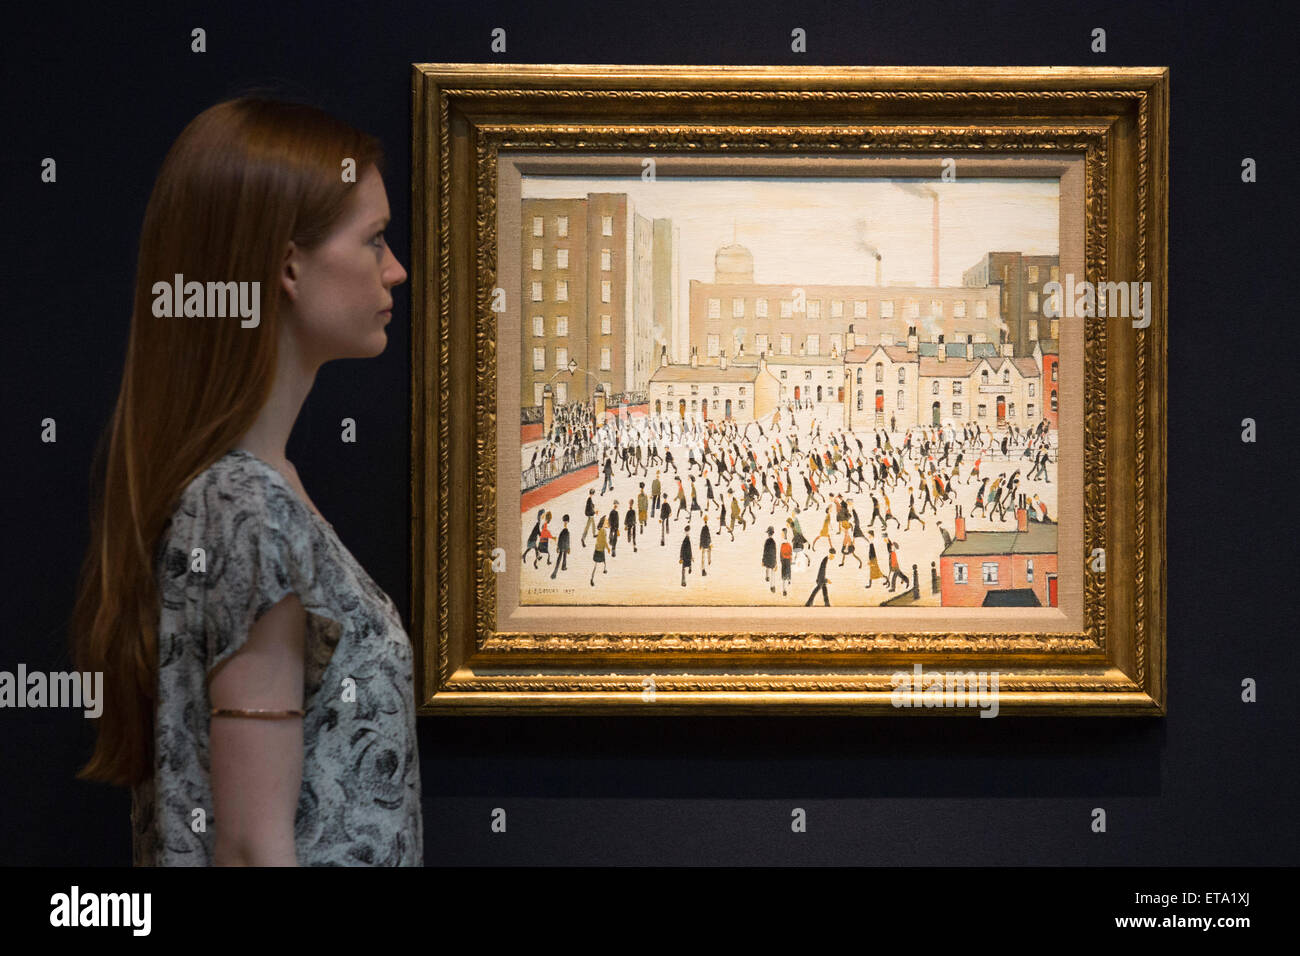 A Christie's employee poses with the L.S. Lowry painting 'Going to Work, estimate GBP 700,000-1m. Preview of the highlights of the Christie's Modern British and Irish Art Evening Sale on 25 June 2015 in London. Stock Photo